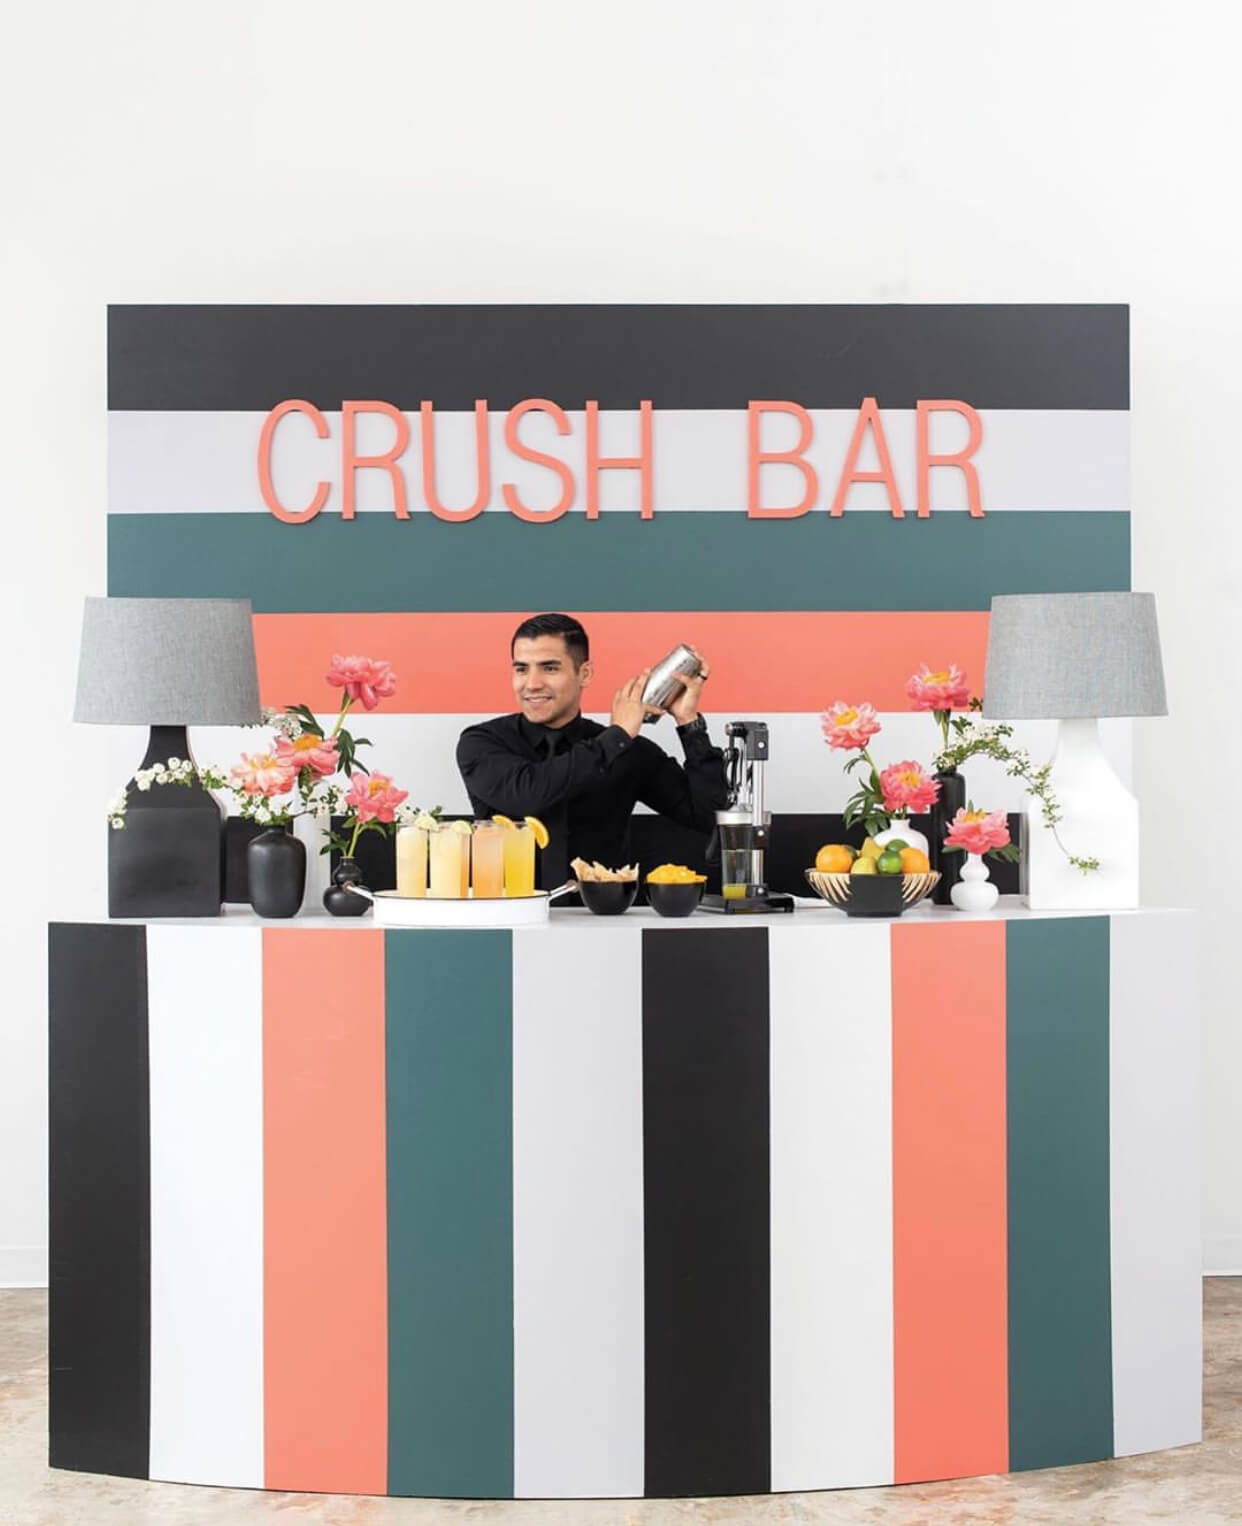 Cool Pop-up Bars That Has The Wedding Vibes